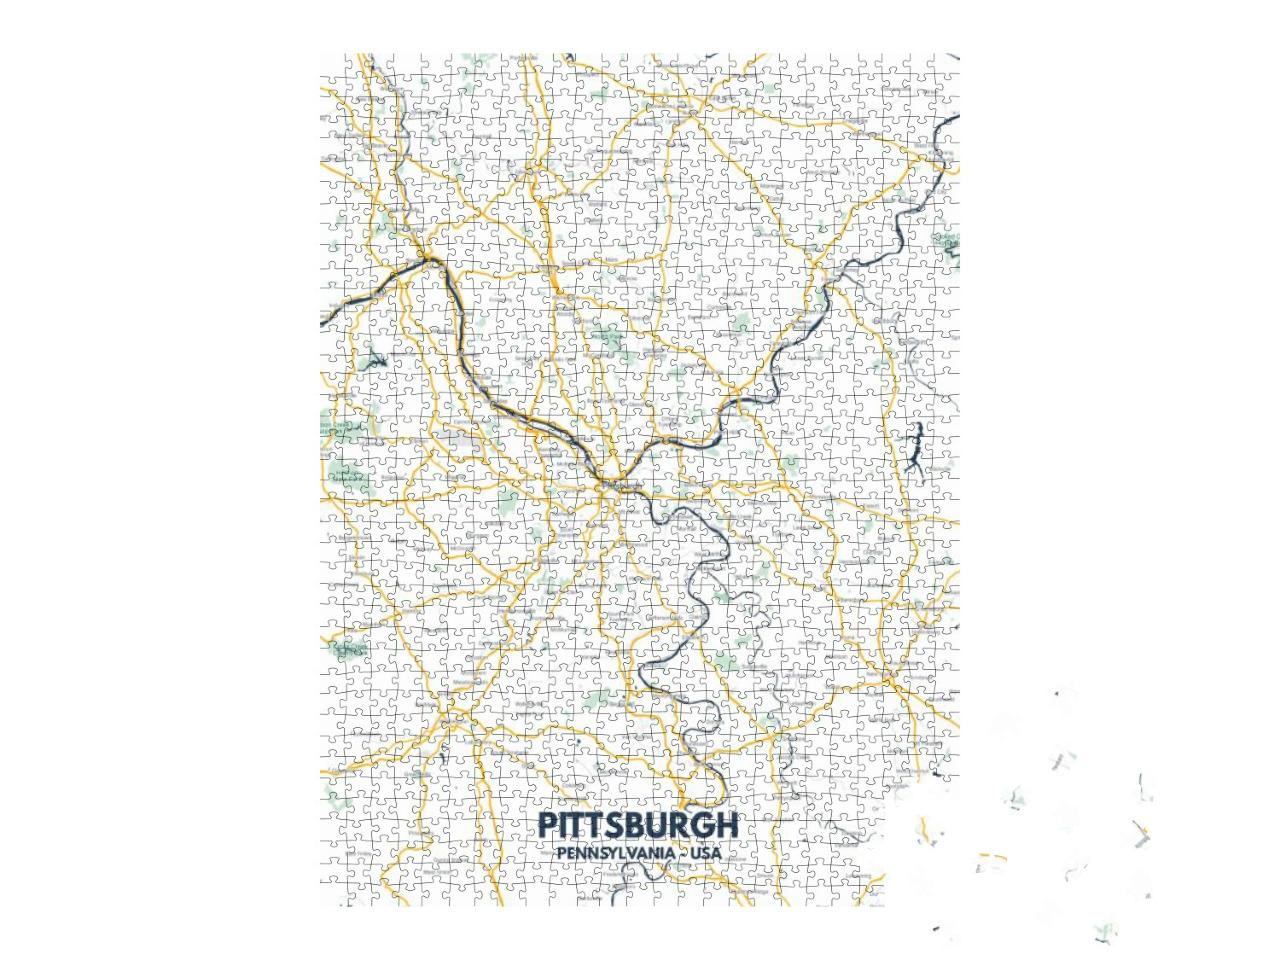 Pittsburgh - Pennsylvania Map. Pittsburgh - Pennsylvania... Jigsaw Puzzle with 1000 pieces